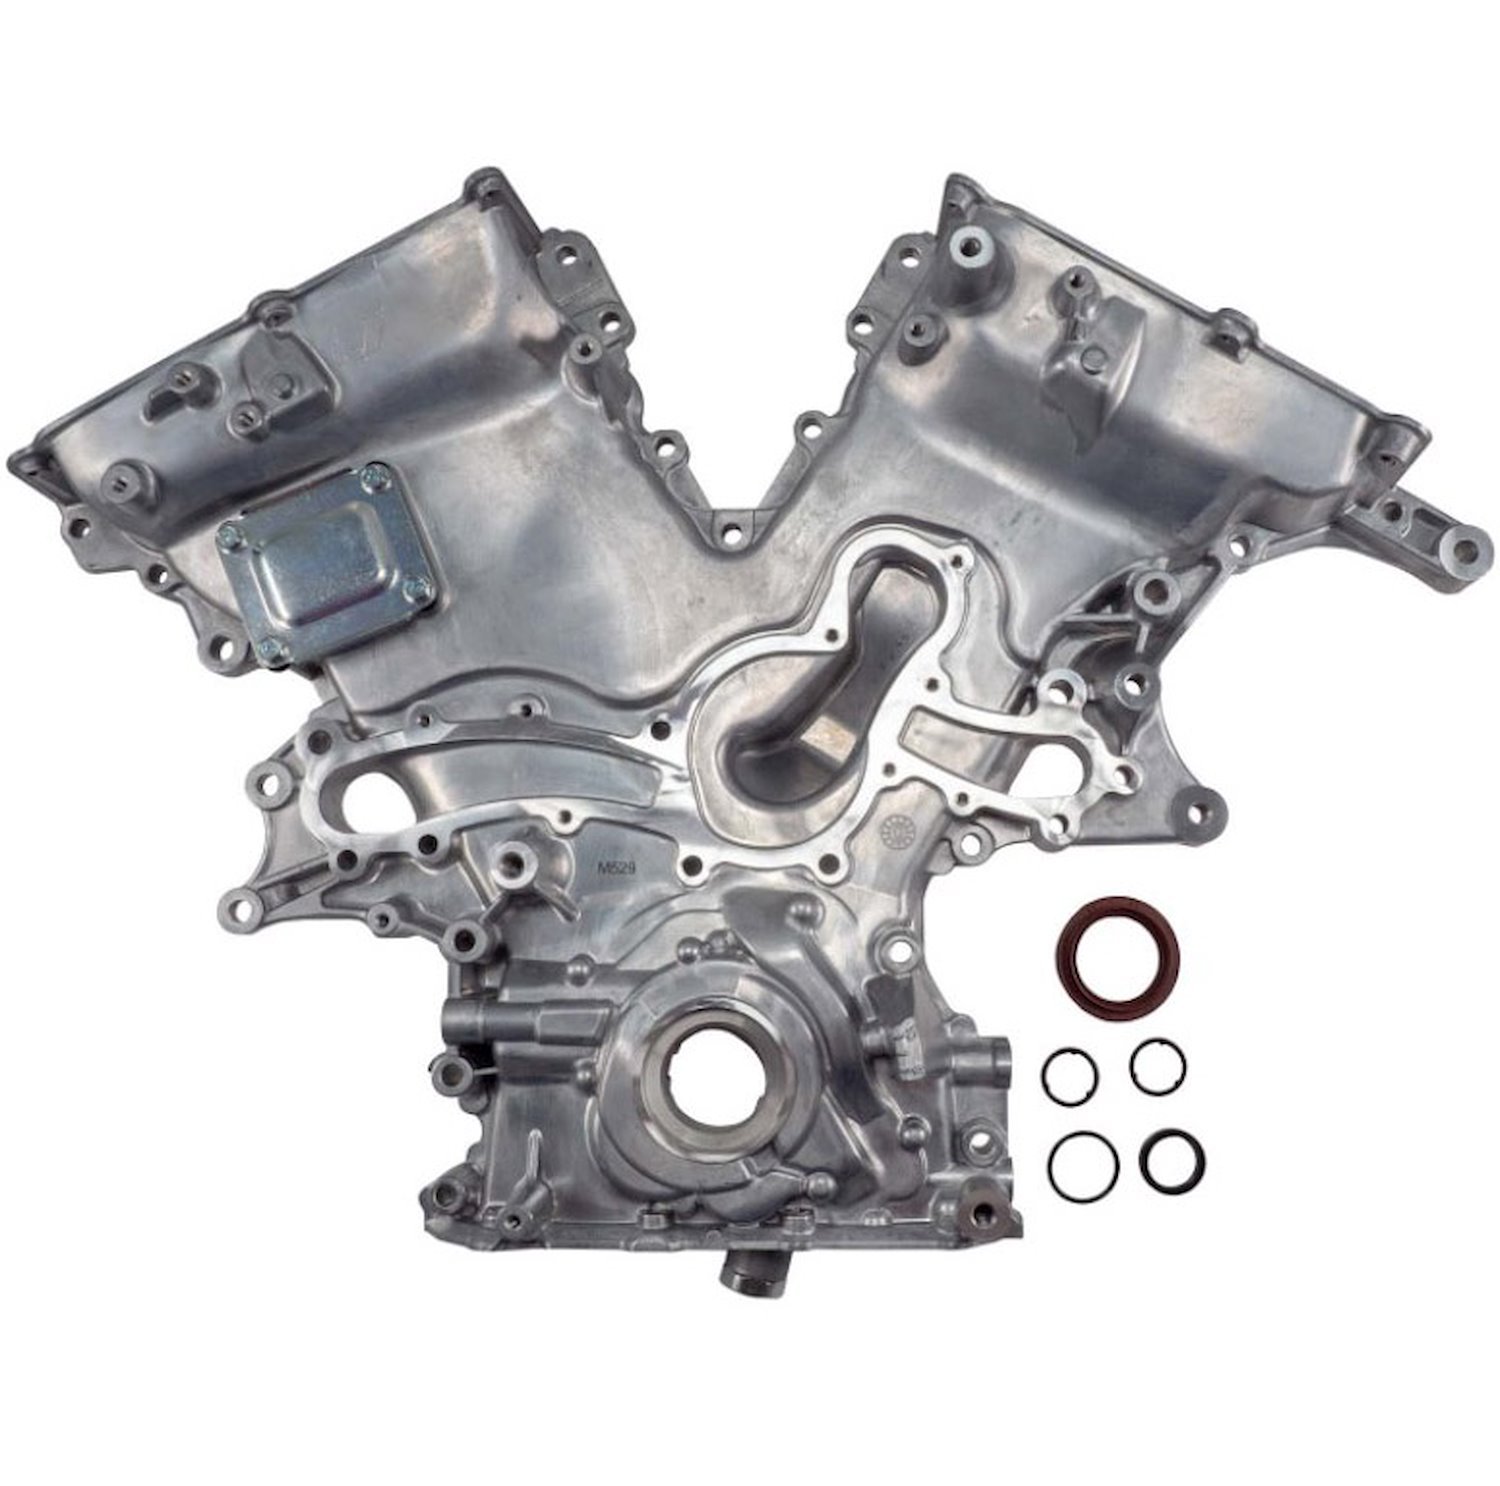 Engine Oil Pump and Timing Cover Assembly [Toyota 4.0L 1GR-FE V6]